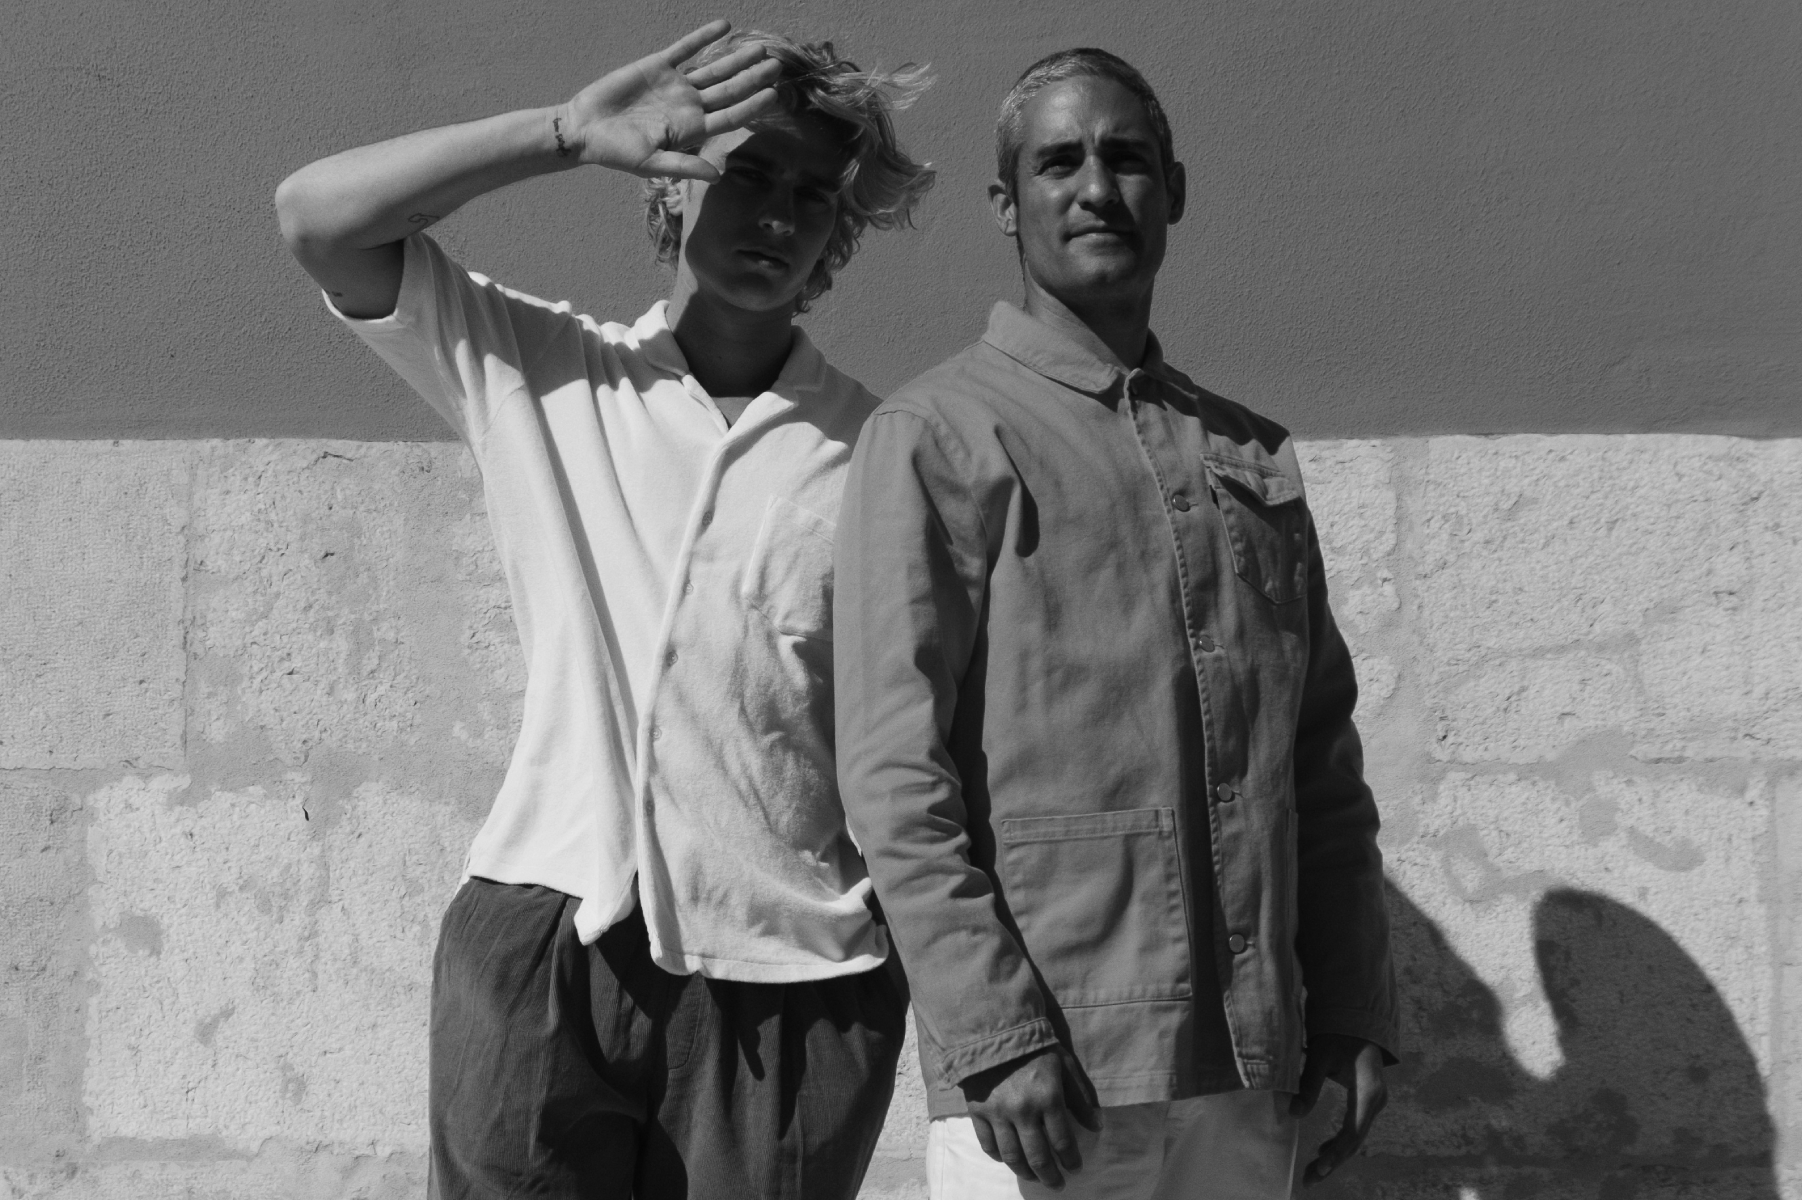 Pedro and Yannick from Saline, the surfing experience Lisbon was longing for.